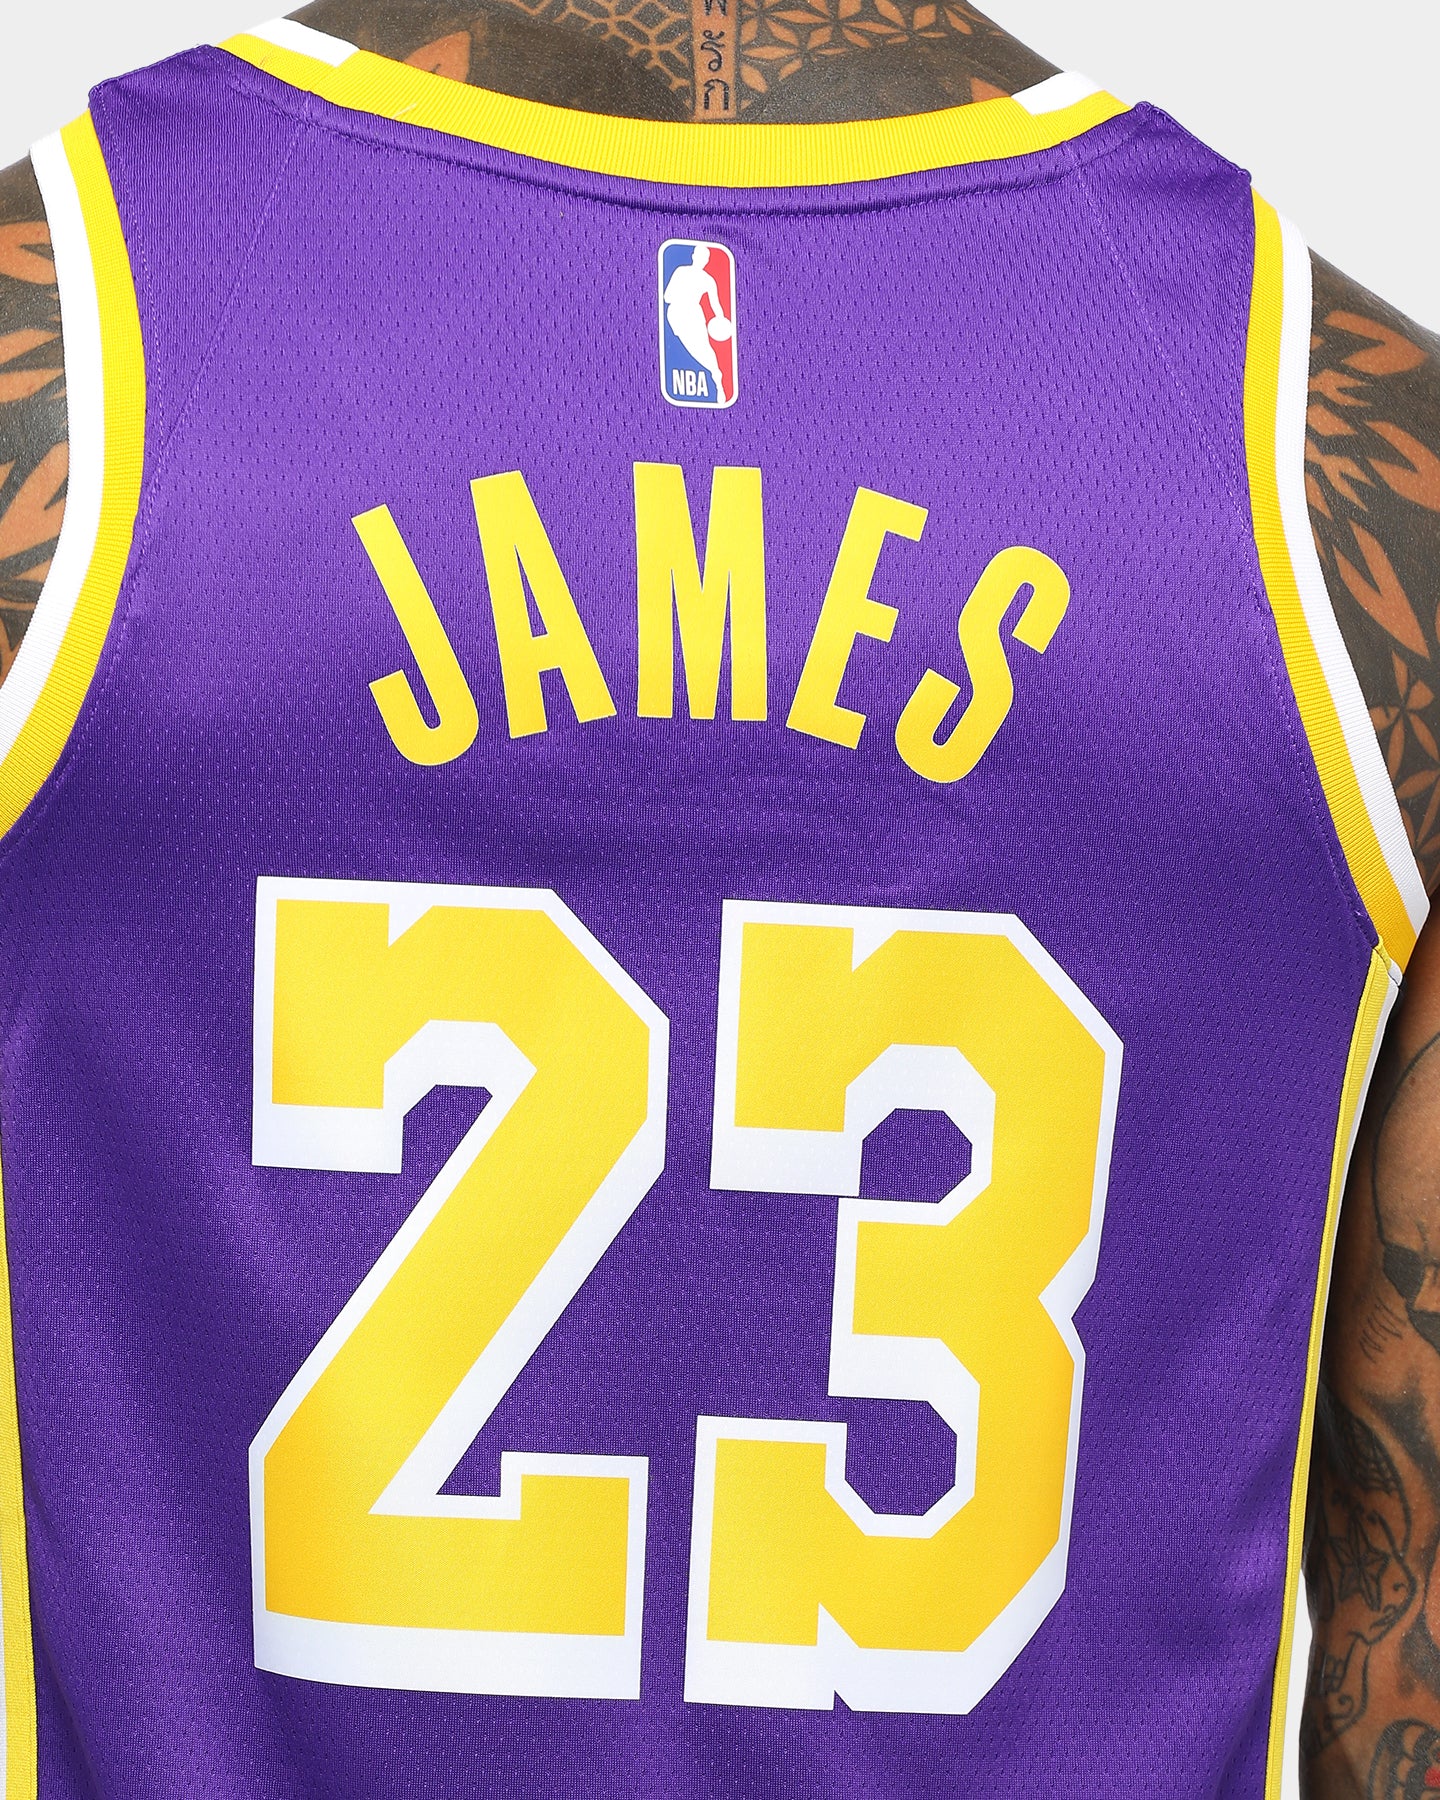 black and purple kings jersey